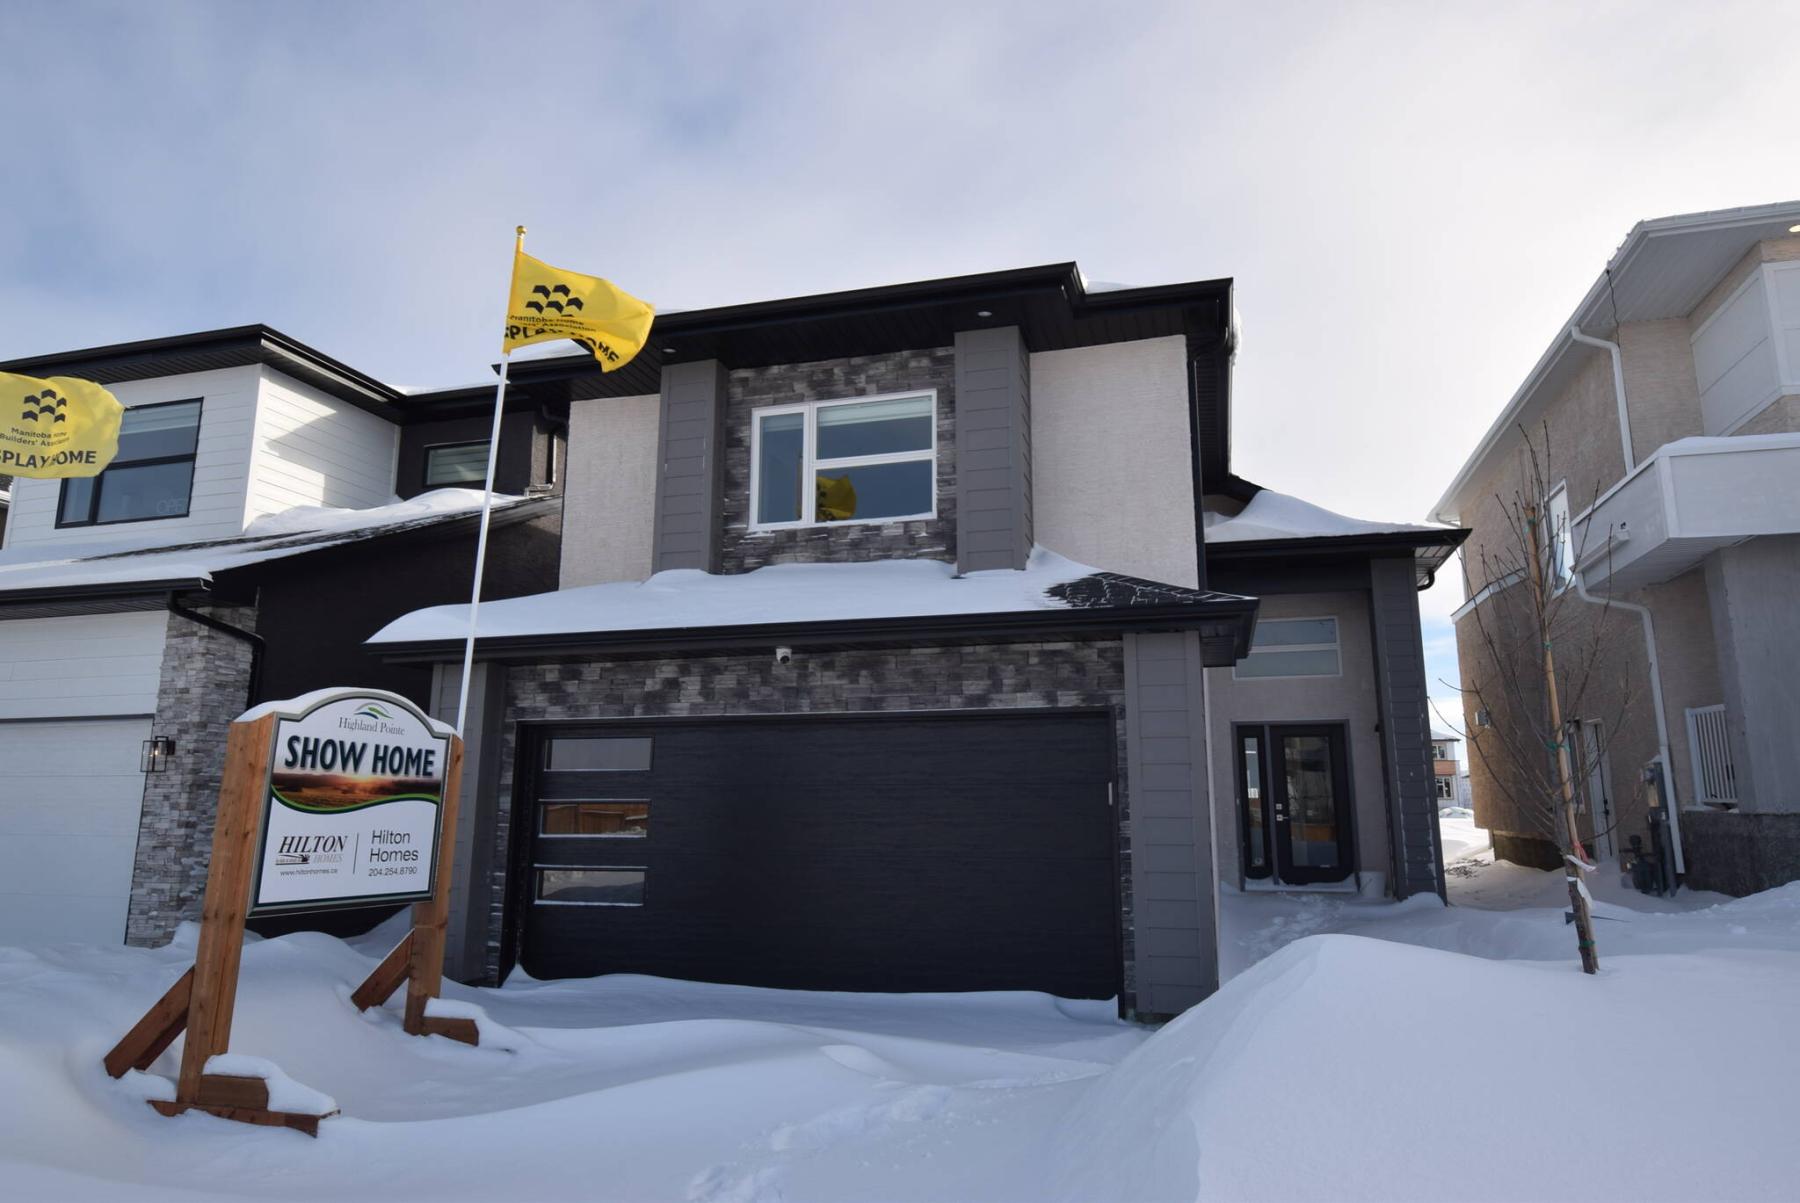  <p>Todd Lewys / Winnipeg Free Press</p>
                                <p>A cab-over design, the Luna features an exceptional floor plan that delivers exceptional style and function.</p> 